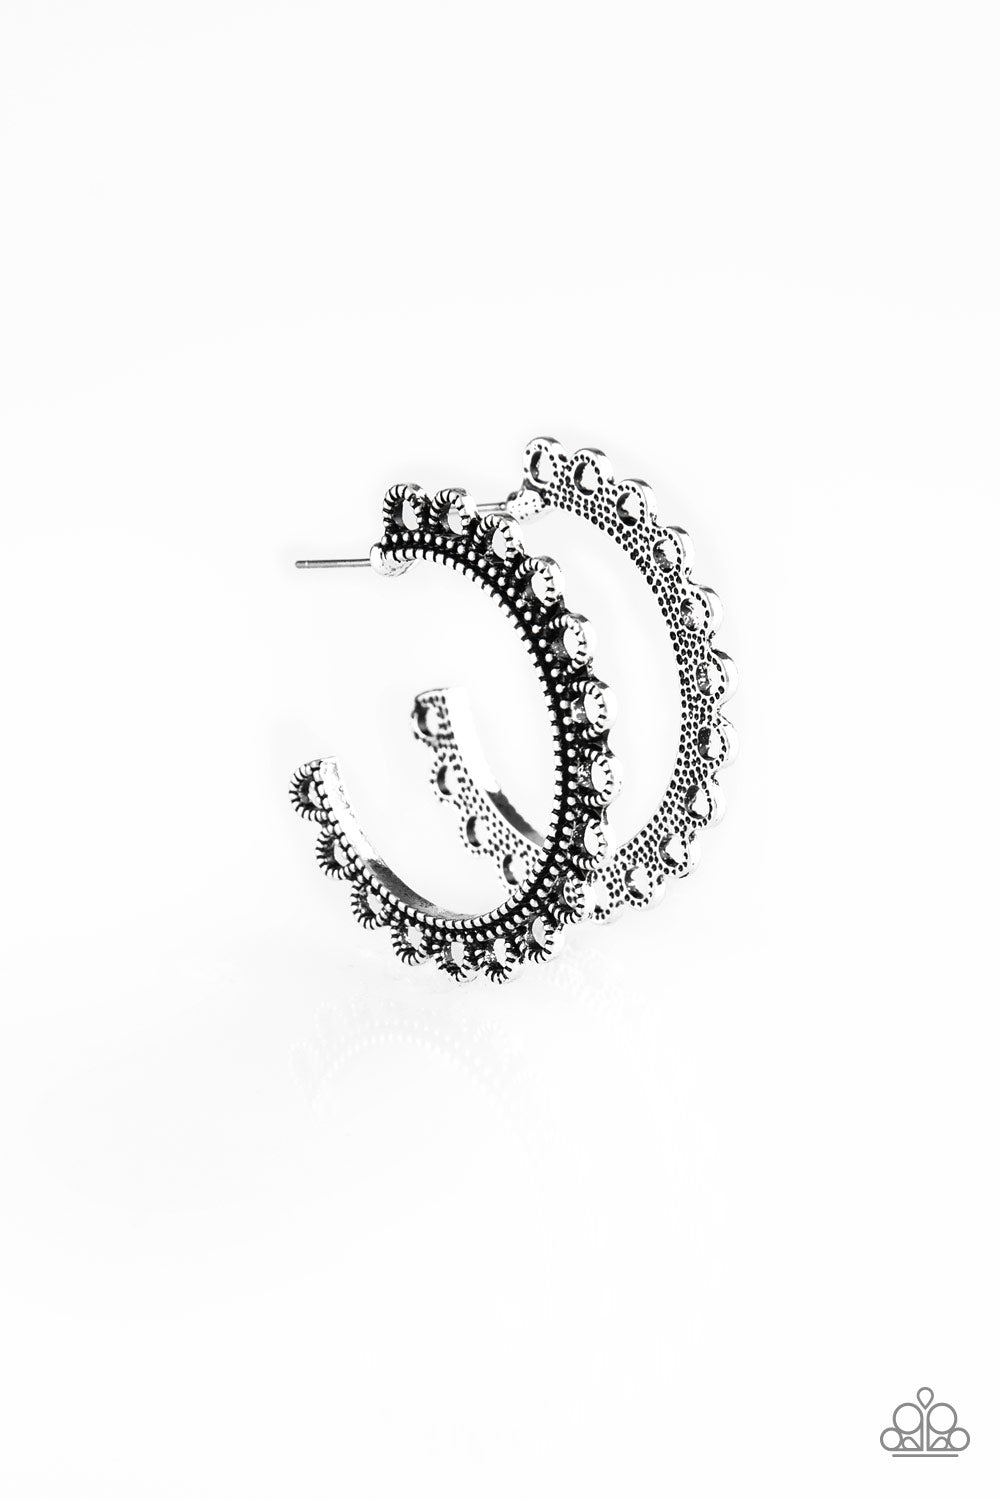 Bohemian Bliss - Silver Item #E390 Radiating with studded silver petals, an ornate silver hoop curls around the ear for a seasonal look. Earring attaches to a standard post fitting. Hoop measures 1 1/4" in diameter. All Paparazzi Accessories are lead free and nickel free!  Sold as one pair of hoop earrings.